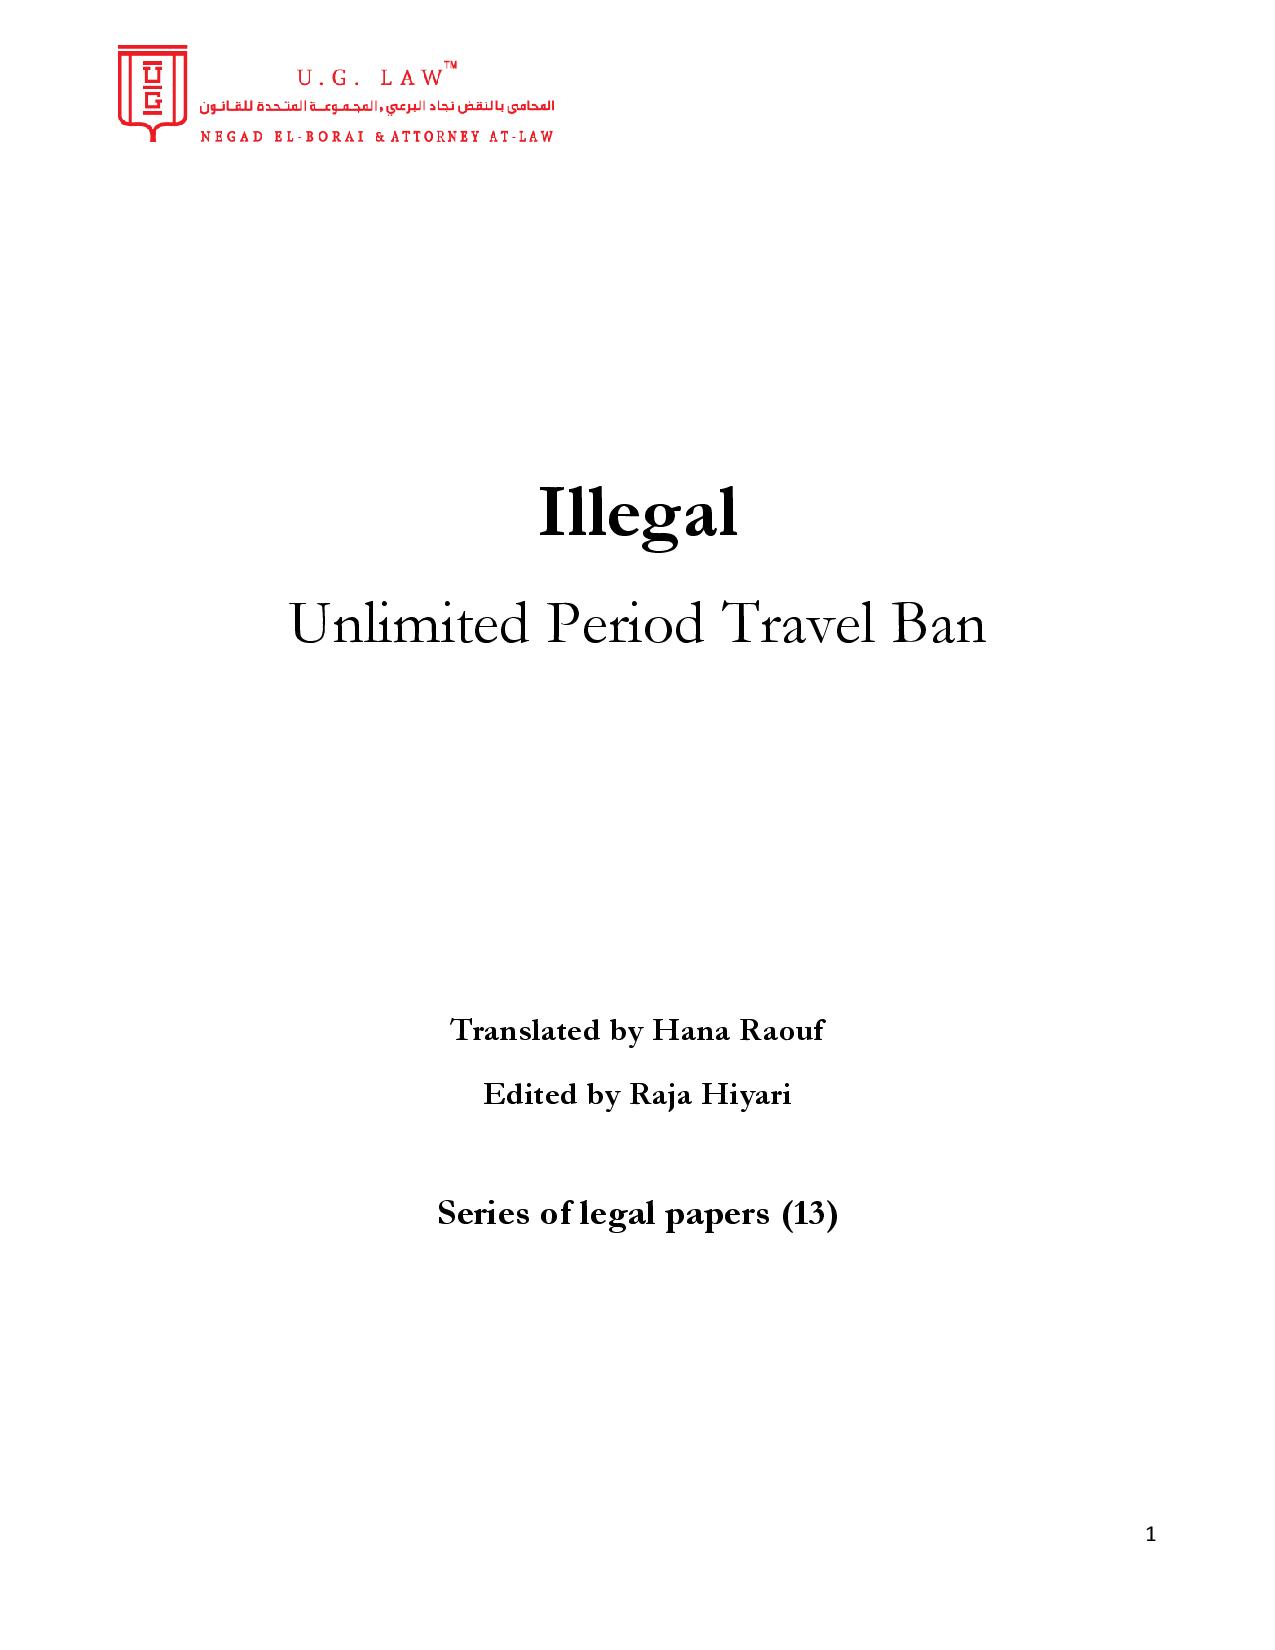 Unlimited Period Travel Ban